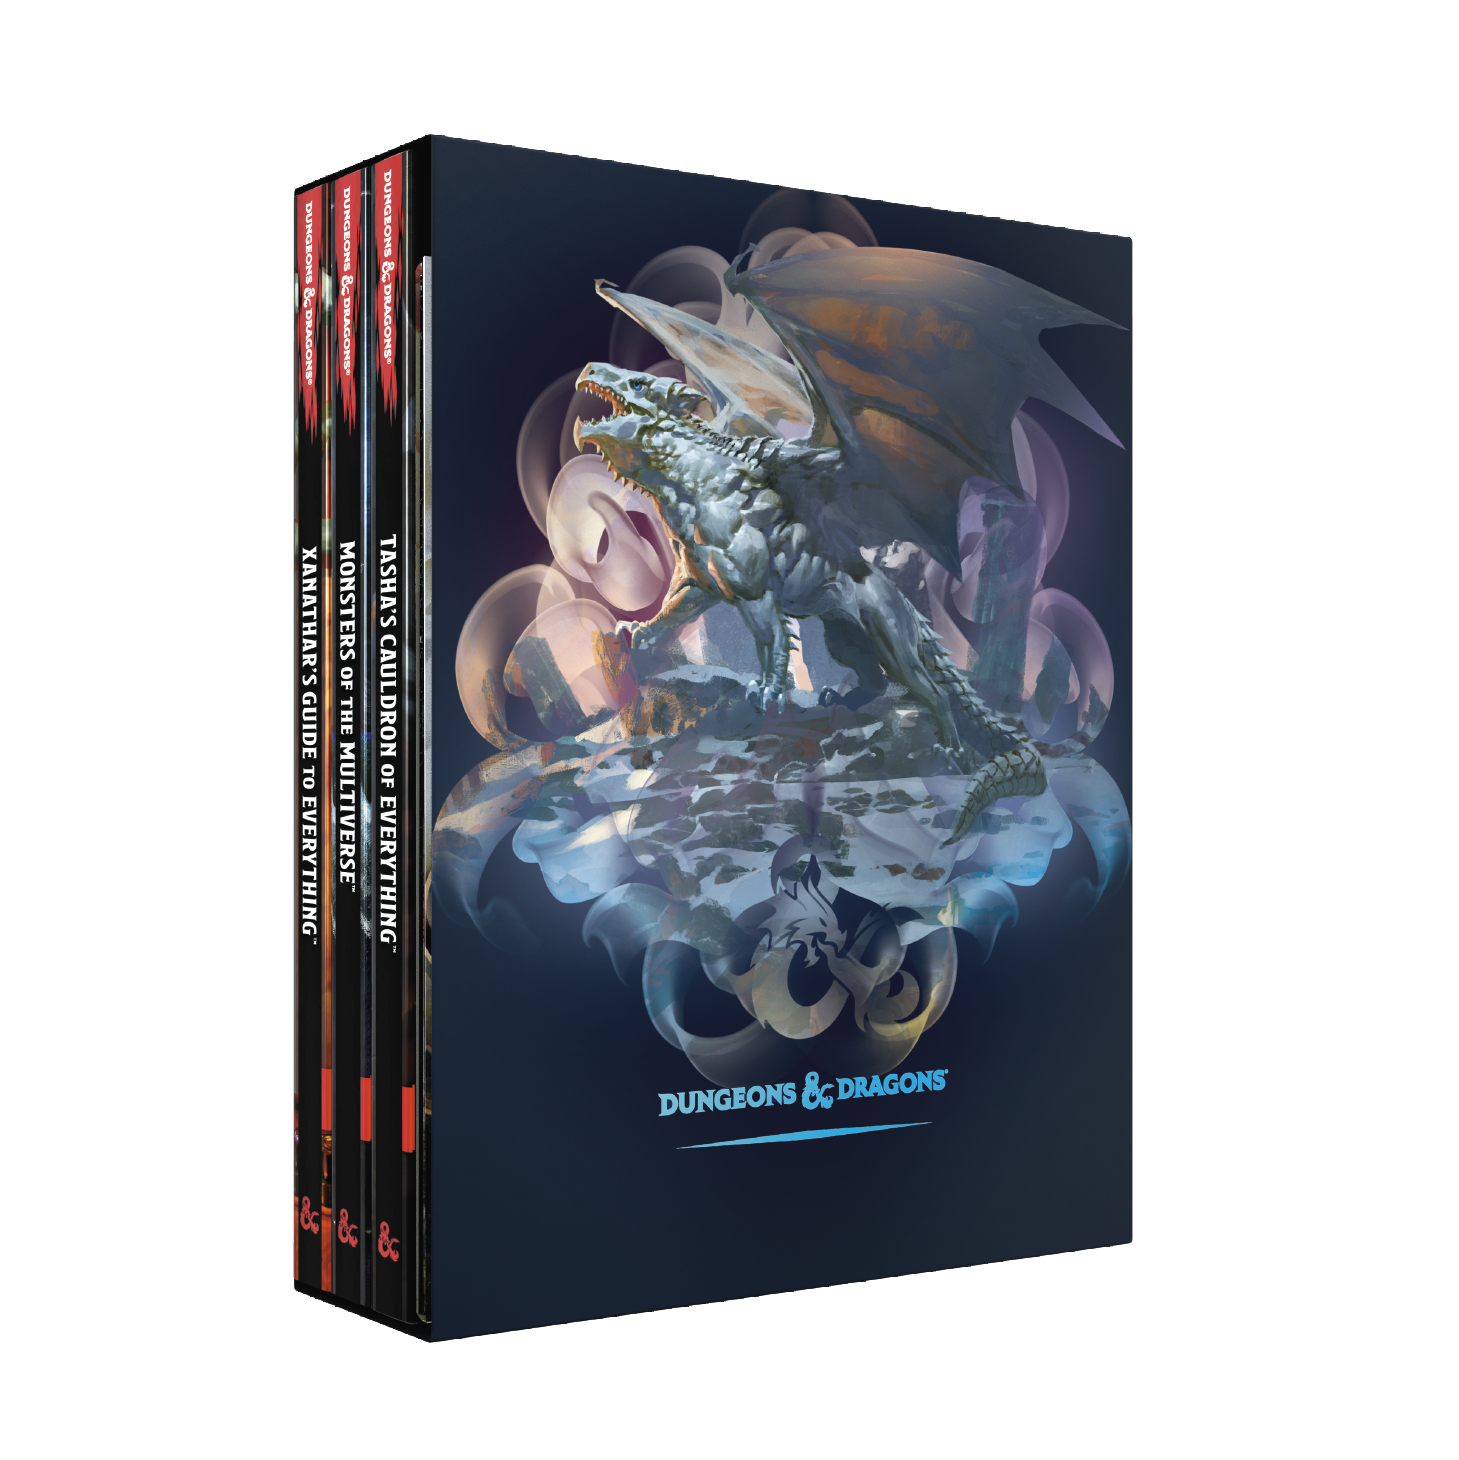 Dungeons & Dragons Rules Expansion Gift Set (D&D Books)-: Tasha's Cauldron  of Everything + Xanathar's Guide to Everything + Monsters of the Multiverse  + DM Screen: Dungeons & Dragons: 9780786967377: Books 